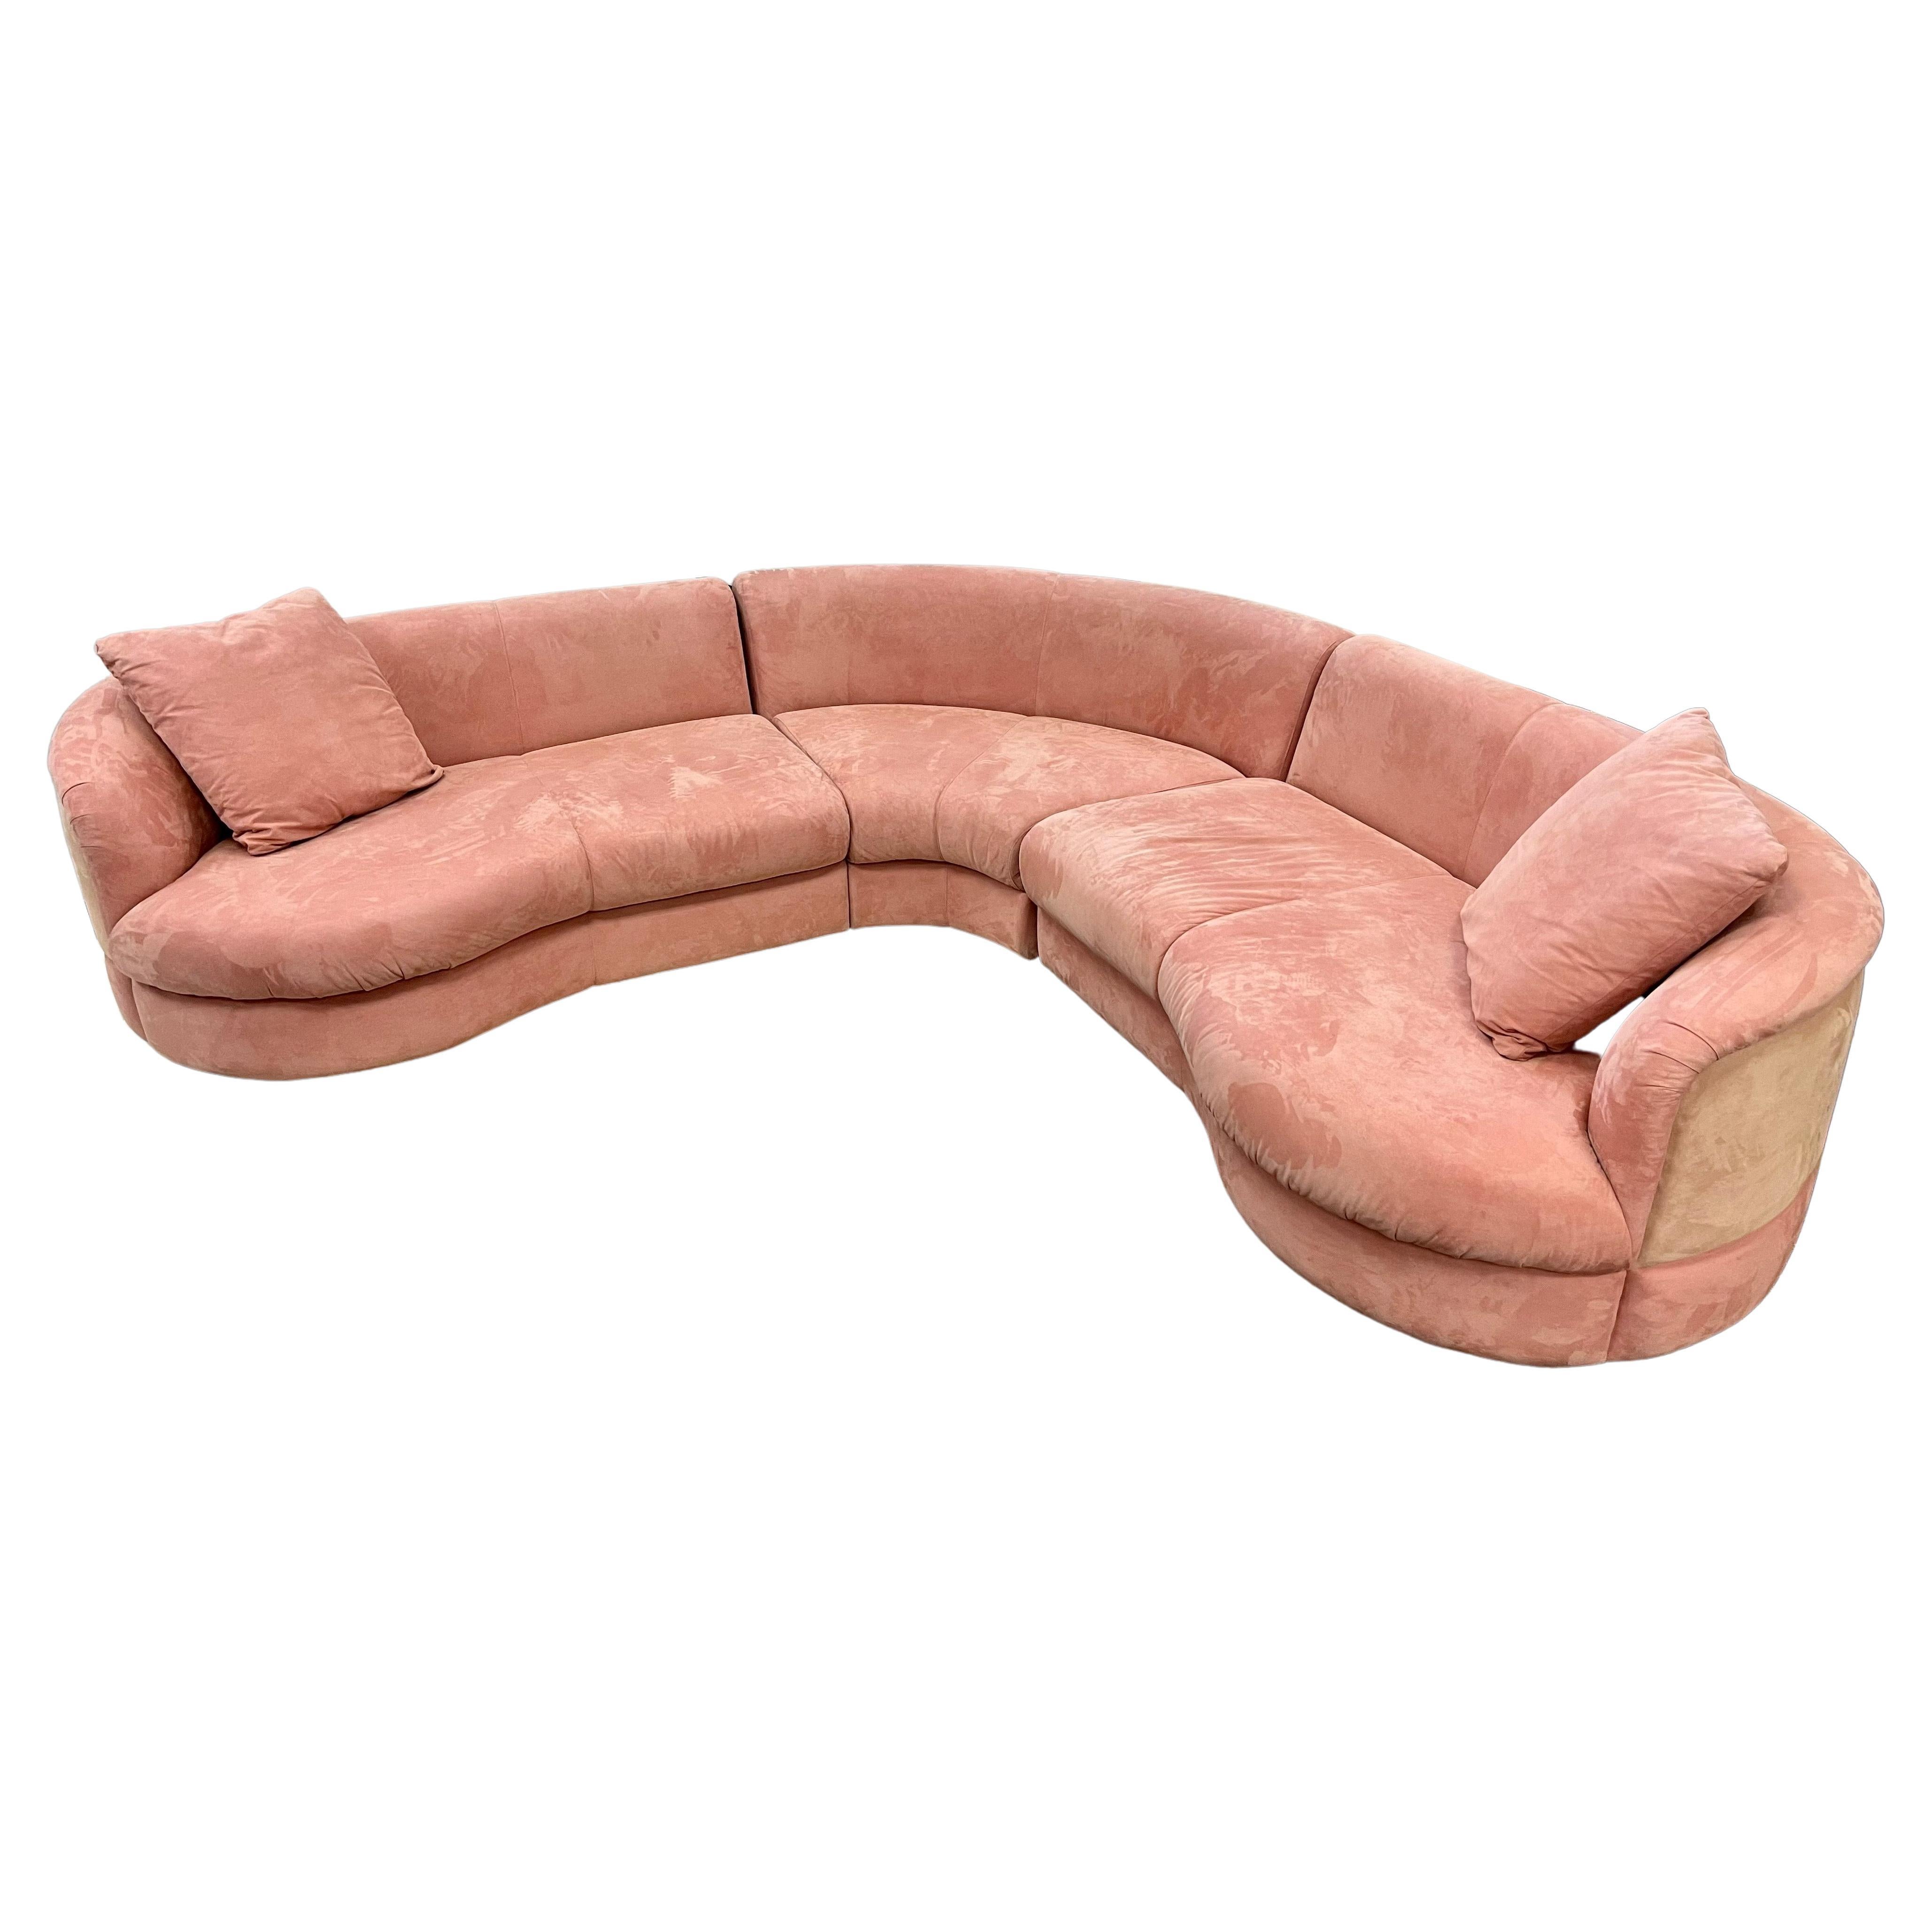 Directional Mid-Century Biomorphic Rose Color Suede Leather Cloud Sofa Sectional